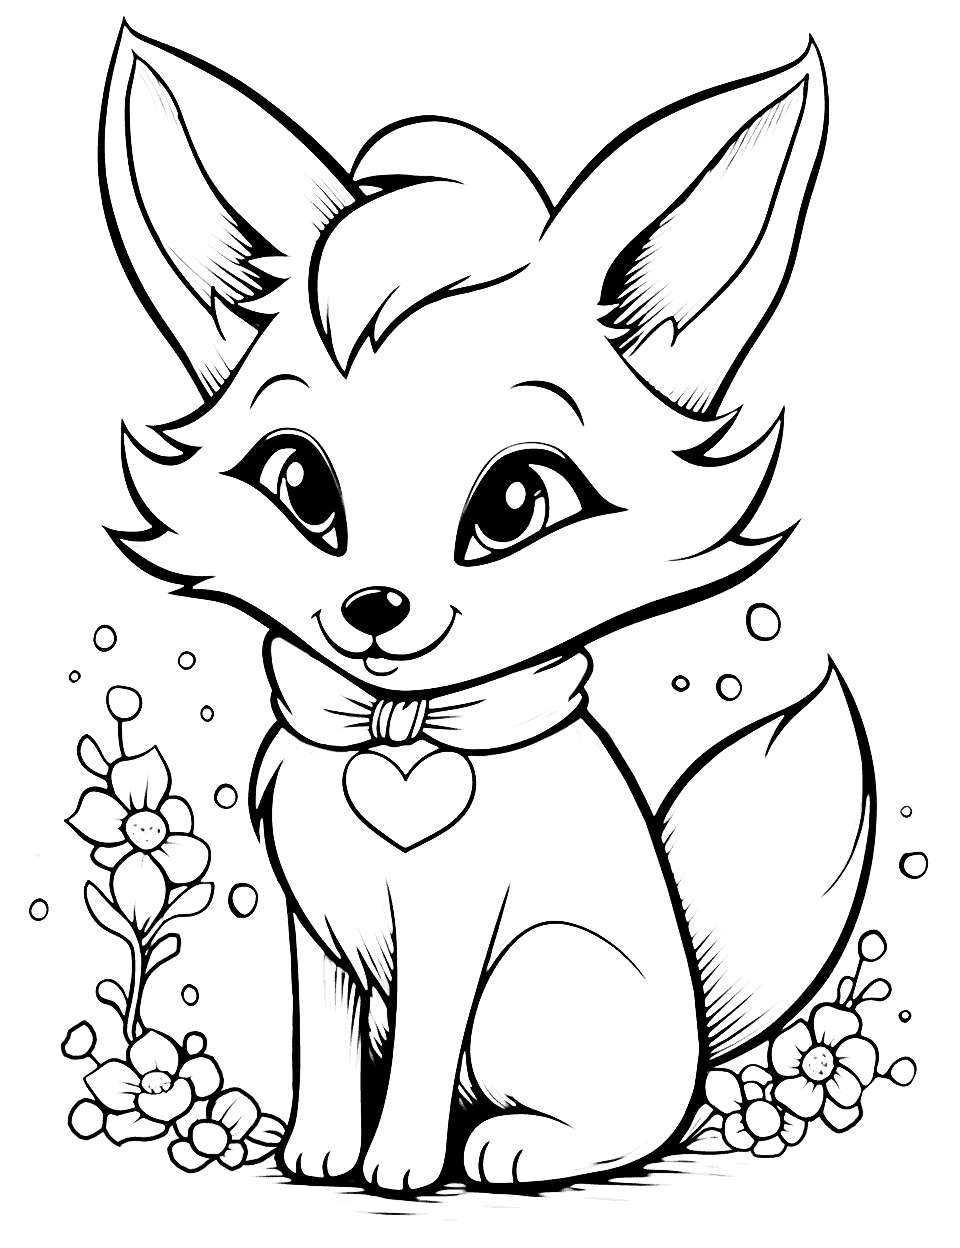 Pretty Fox With a Bow Coloring Page - A fox adorned with a dainty bow and surrounded by lovely colorful flowers.